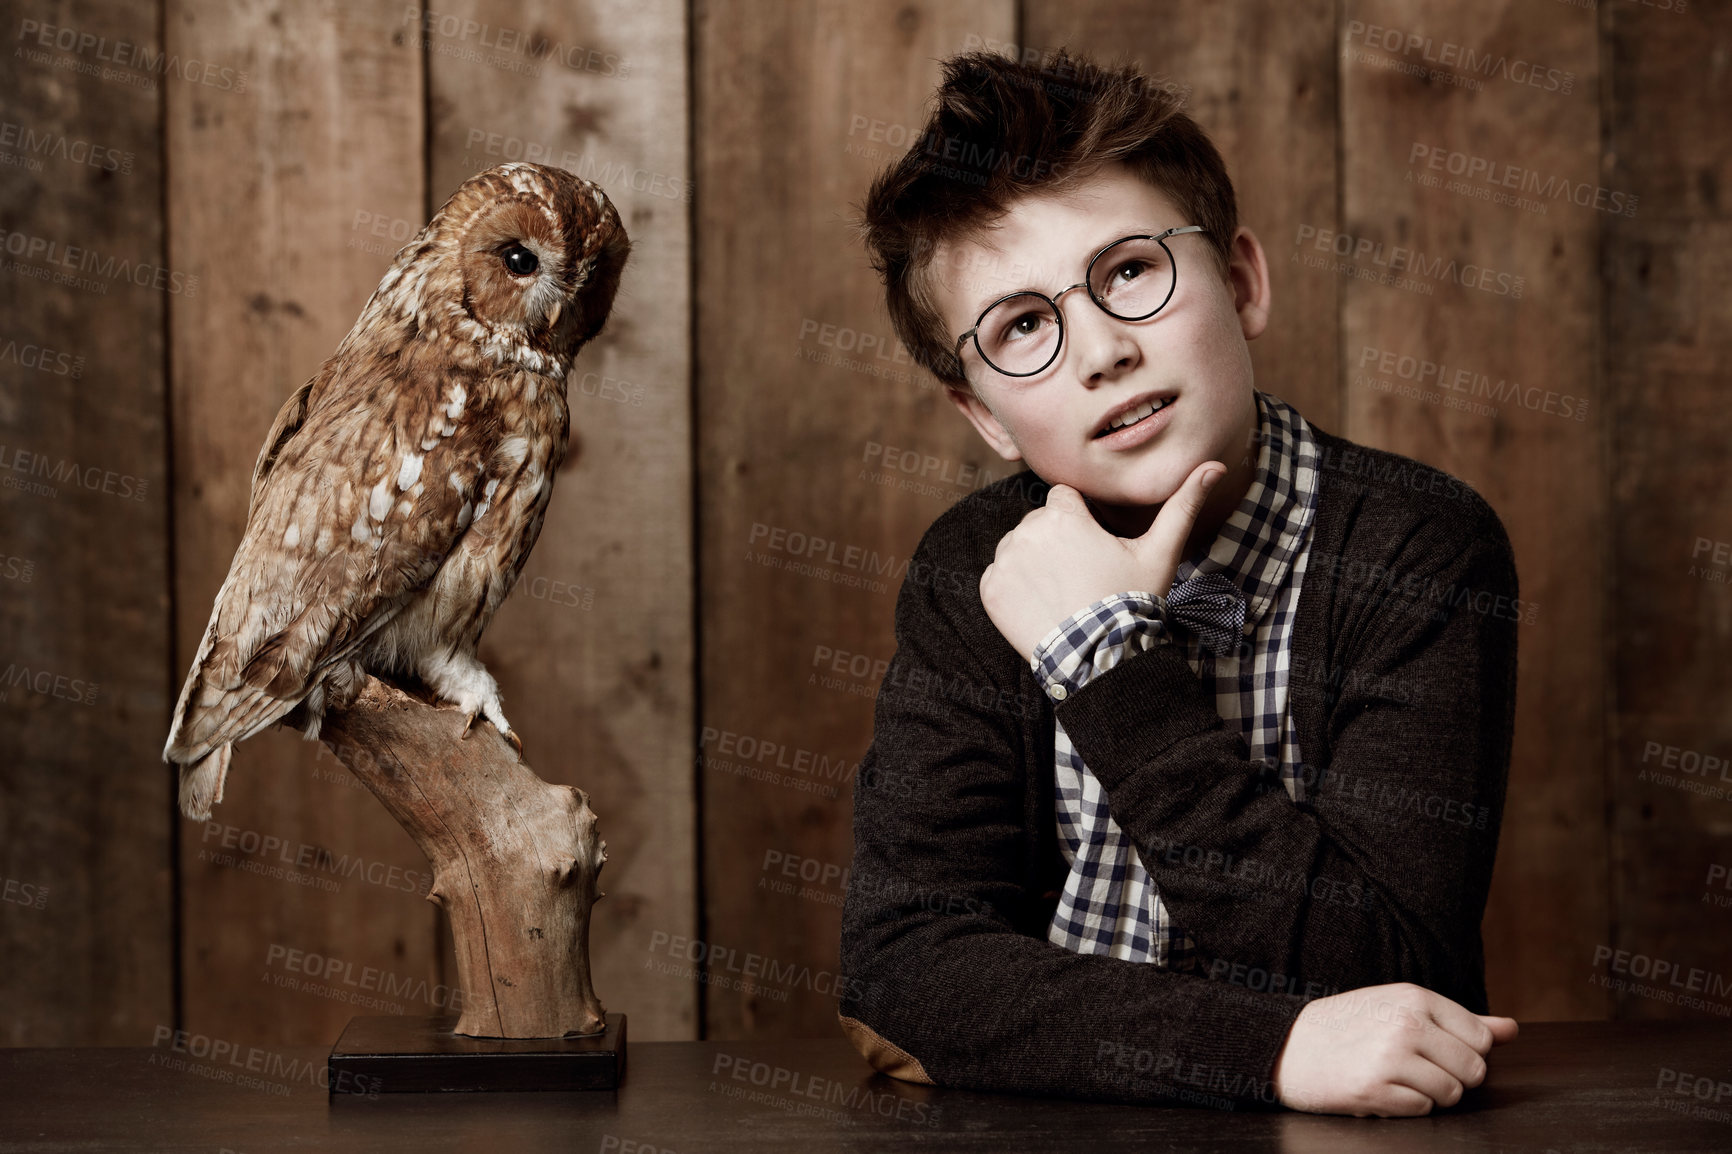 Buy stock photo Young boy in retro clothing wearing spectacles with a thoughtful expression alongside an owl